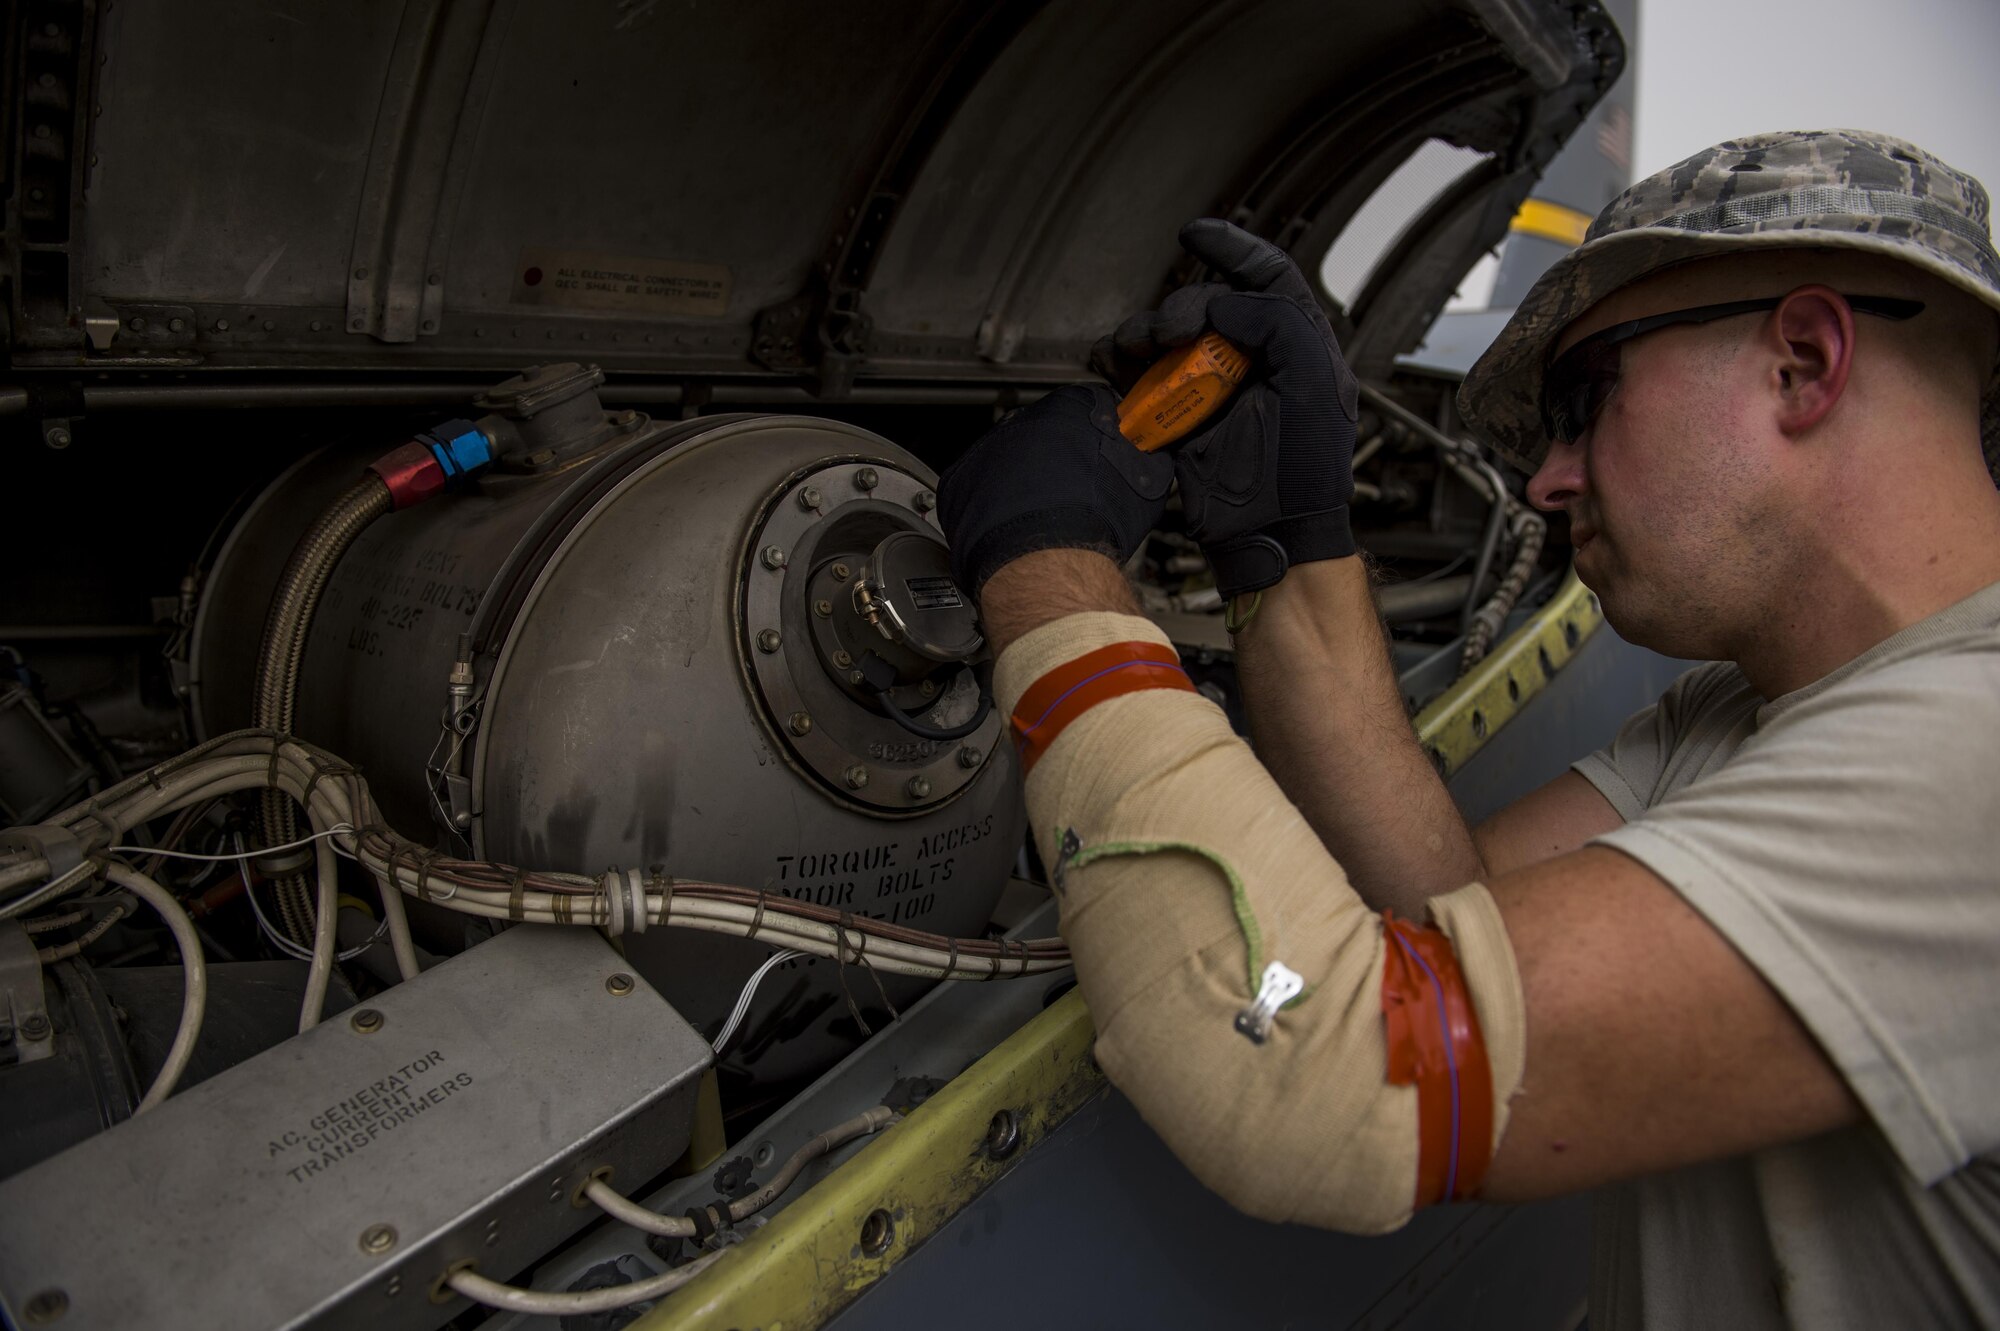 A U.S. Air Force maintainer from the Alaska Air National Guard's 144th Airlift Squadron works on a C-130 Hercules before it departs for a transport mission at an undisclosed location in Southwest Asia, June 16, 2016. The transport mission was one of the last combat missions during the 144th AS's final C-130 deployment. (U.S. Air Force photo by Staff Sgt. Douglas Ellis/Released)